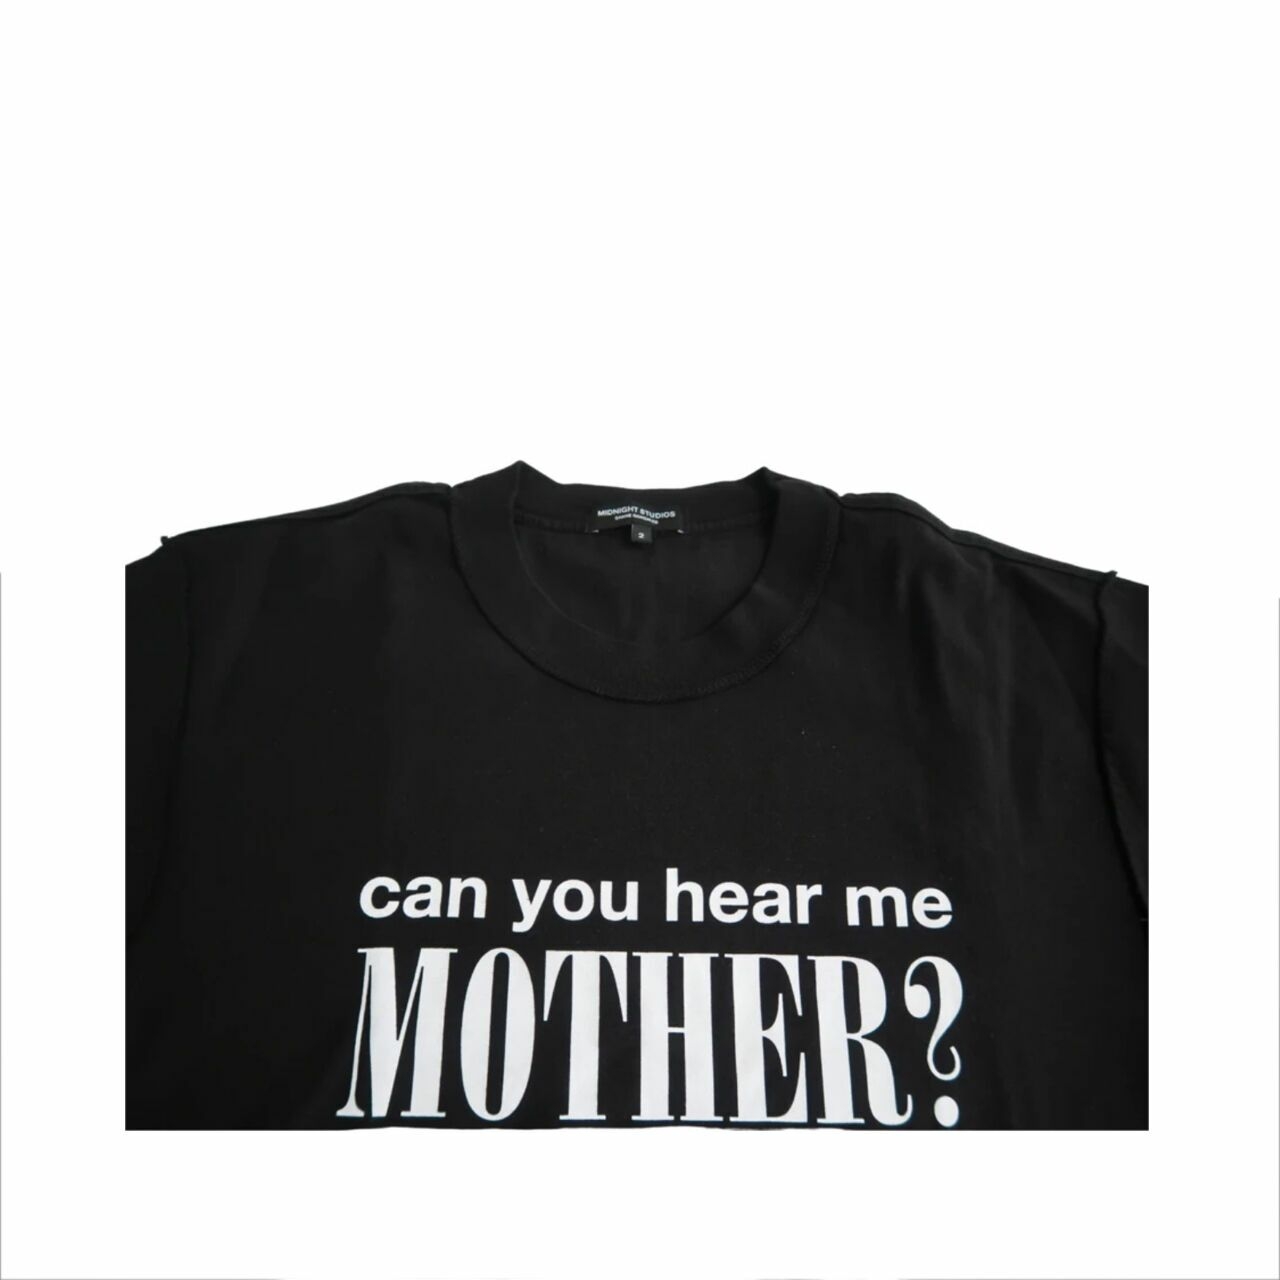 Midnight Studios x Shane Gonzales Can you hear me mother? T-Shirt